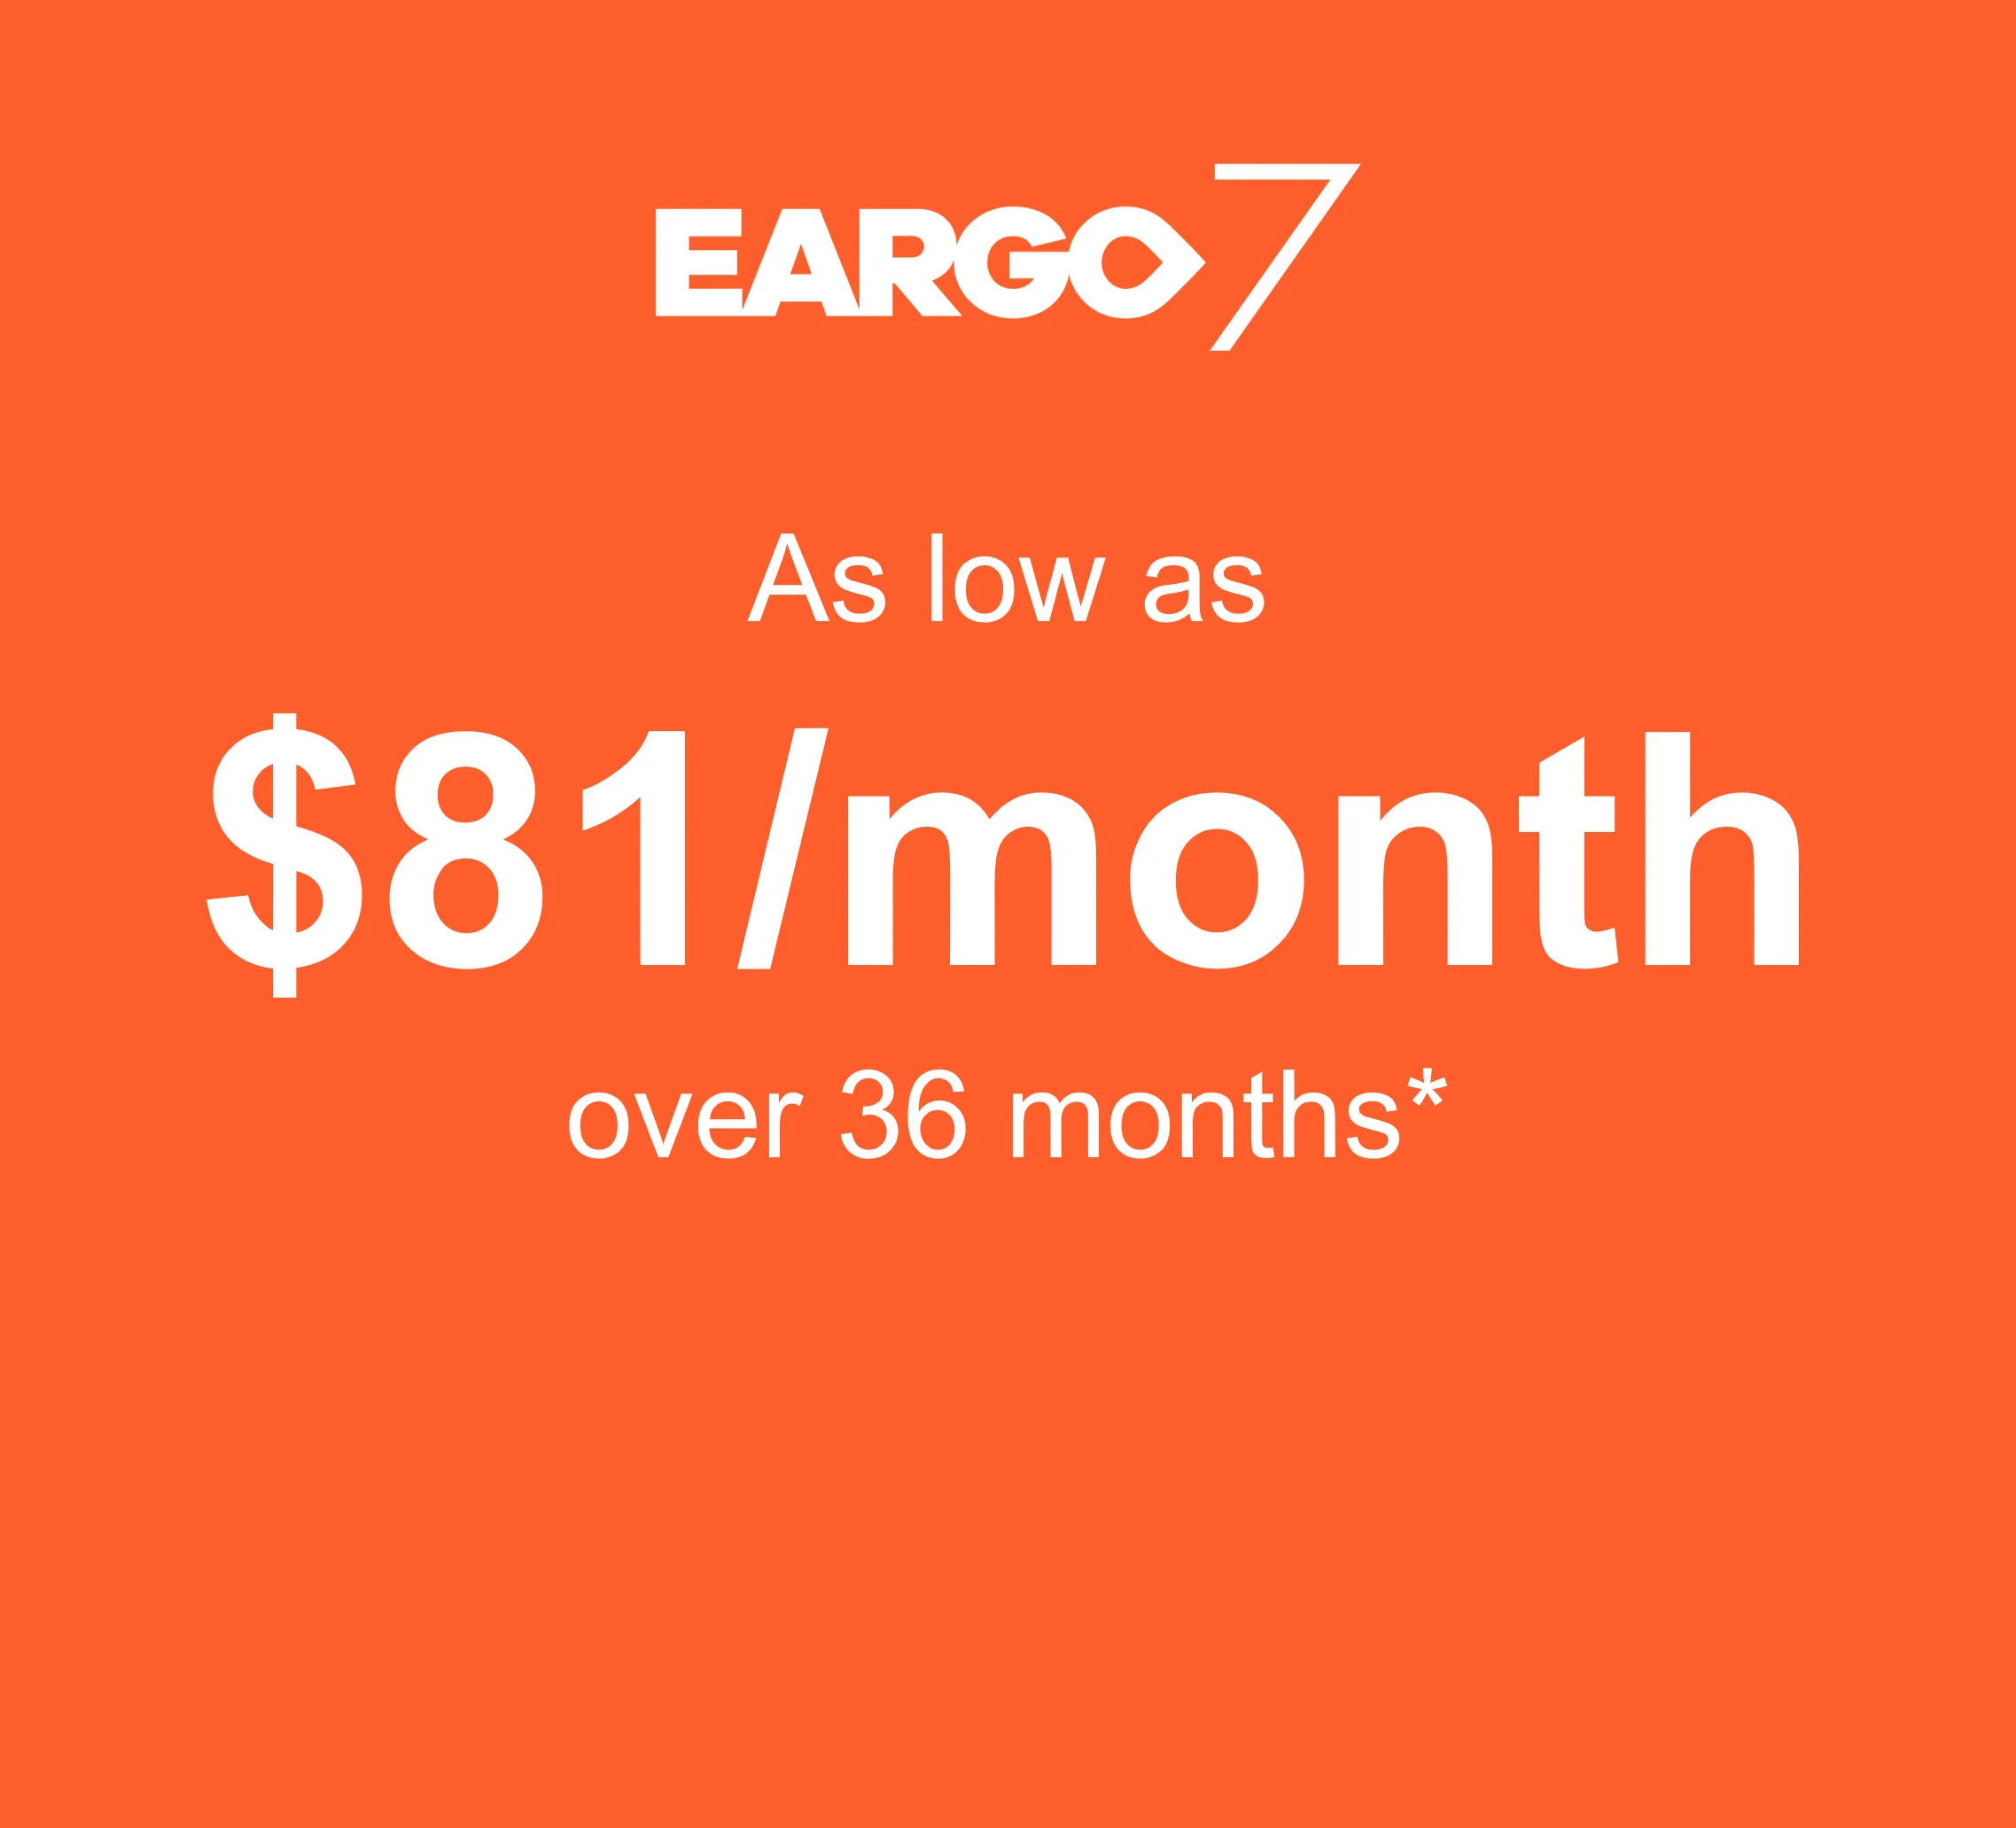 As low as $81/month over 36 months with 9.99% APR